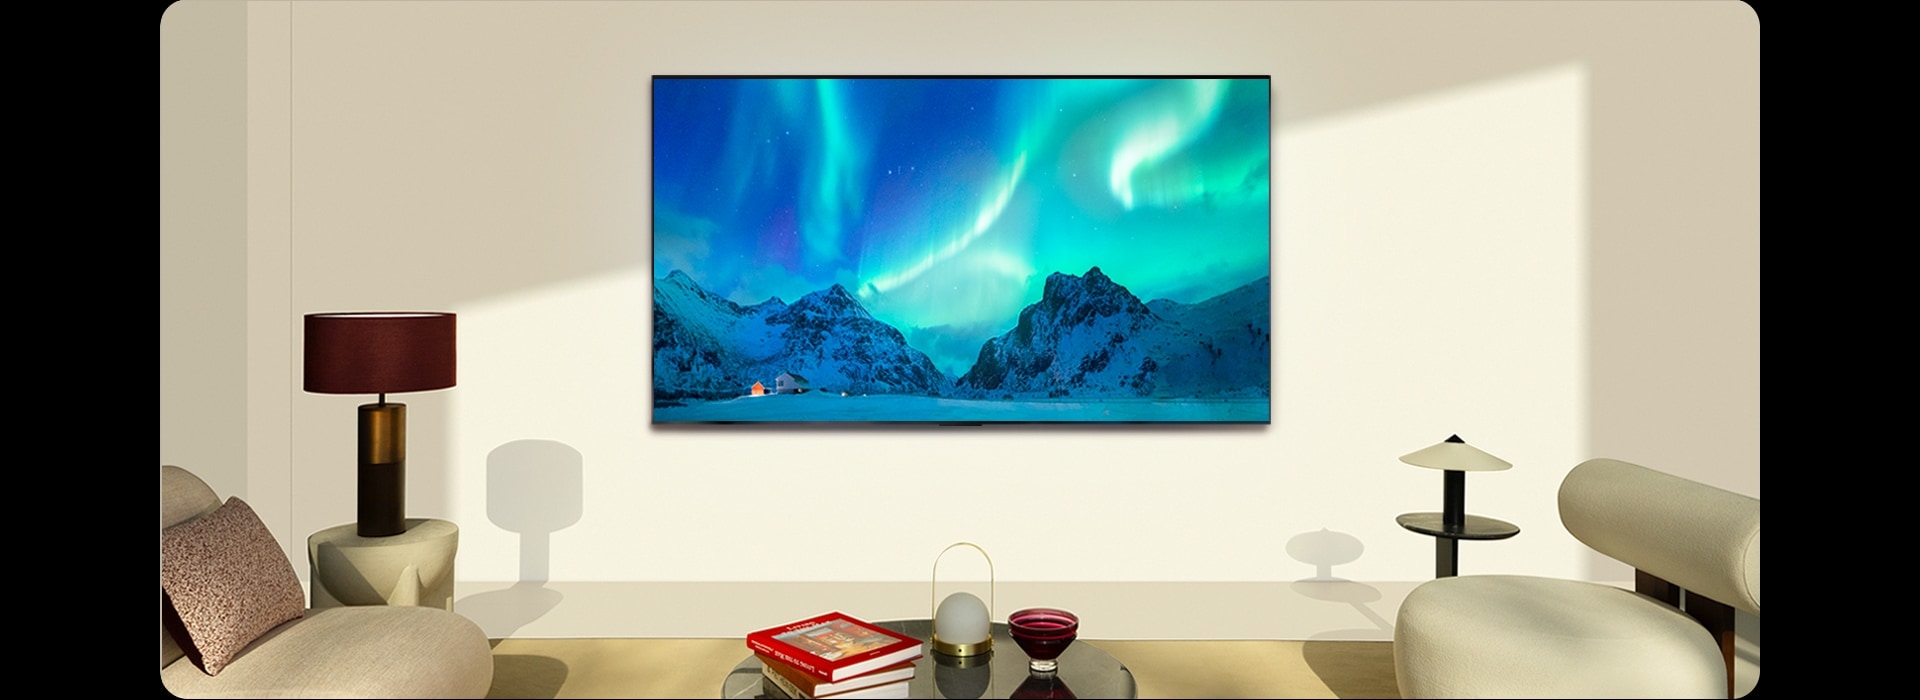 LG OLED TV in a modern living space in daytime. The screen image of the aurora borealis is displayed with the ideal brightness levels.	